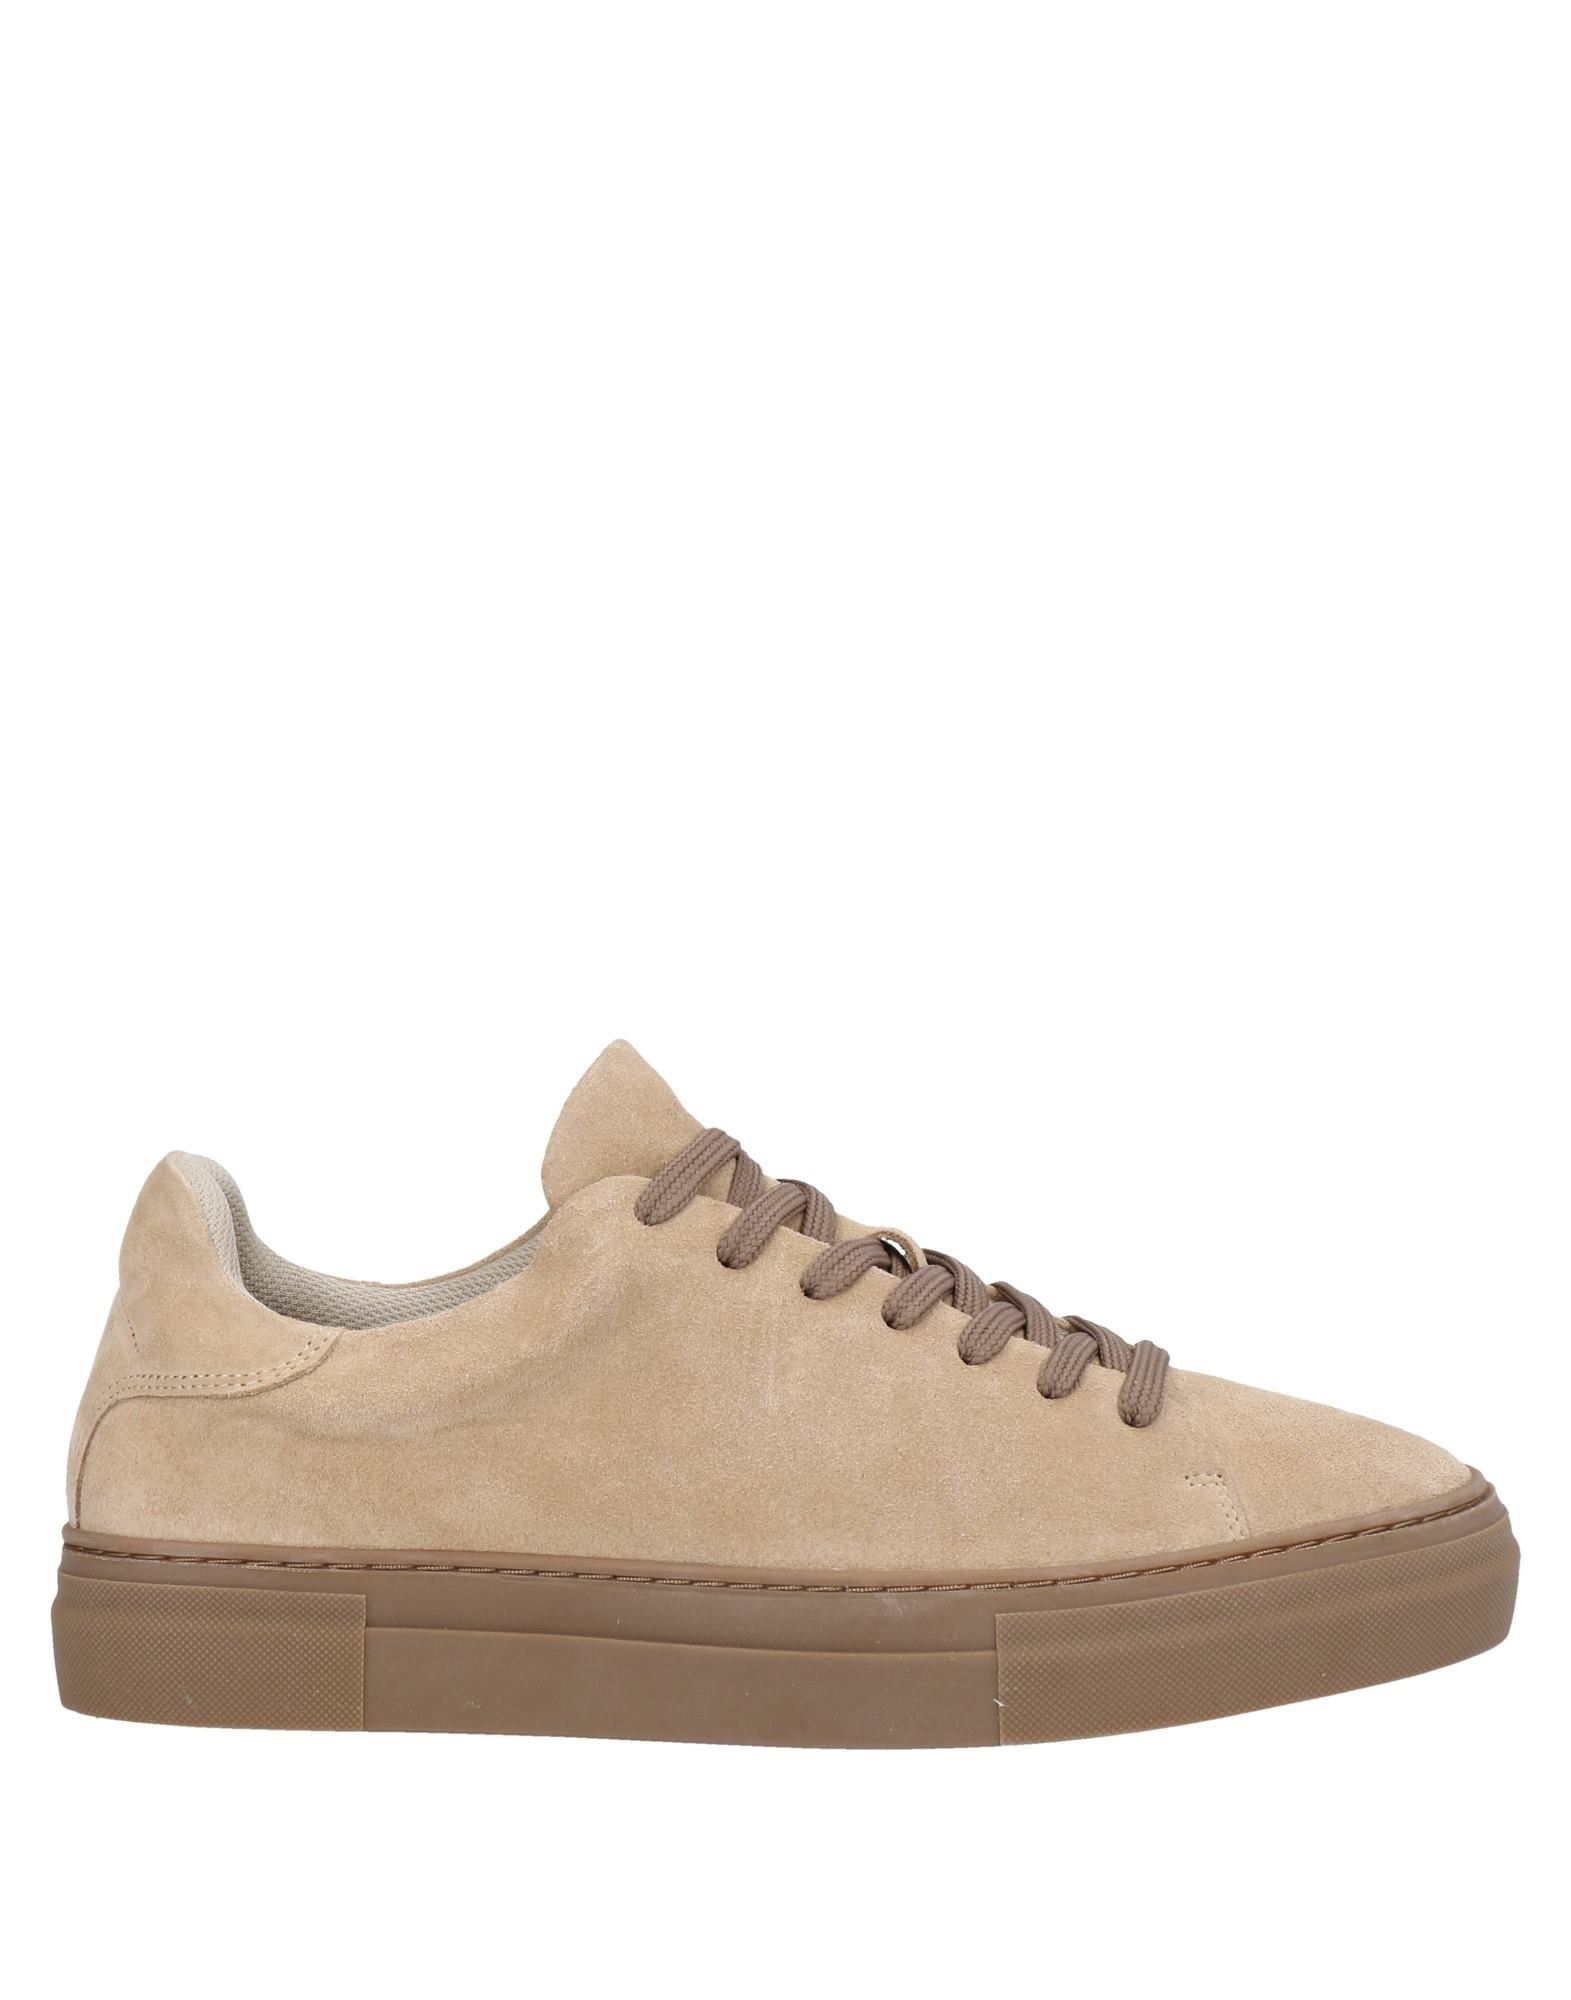 Selected Homme Sneakers In Sand